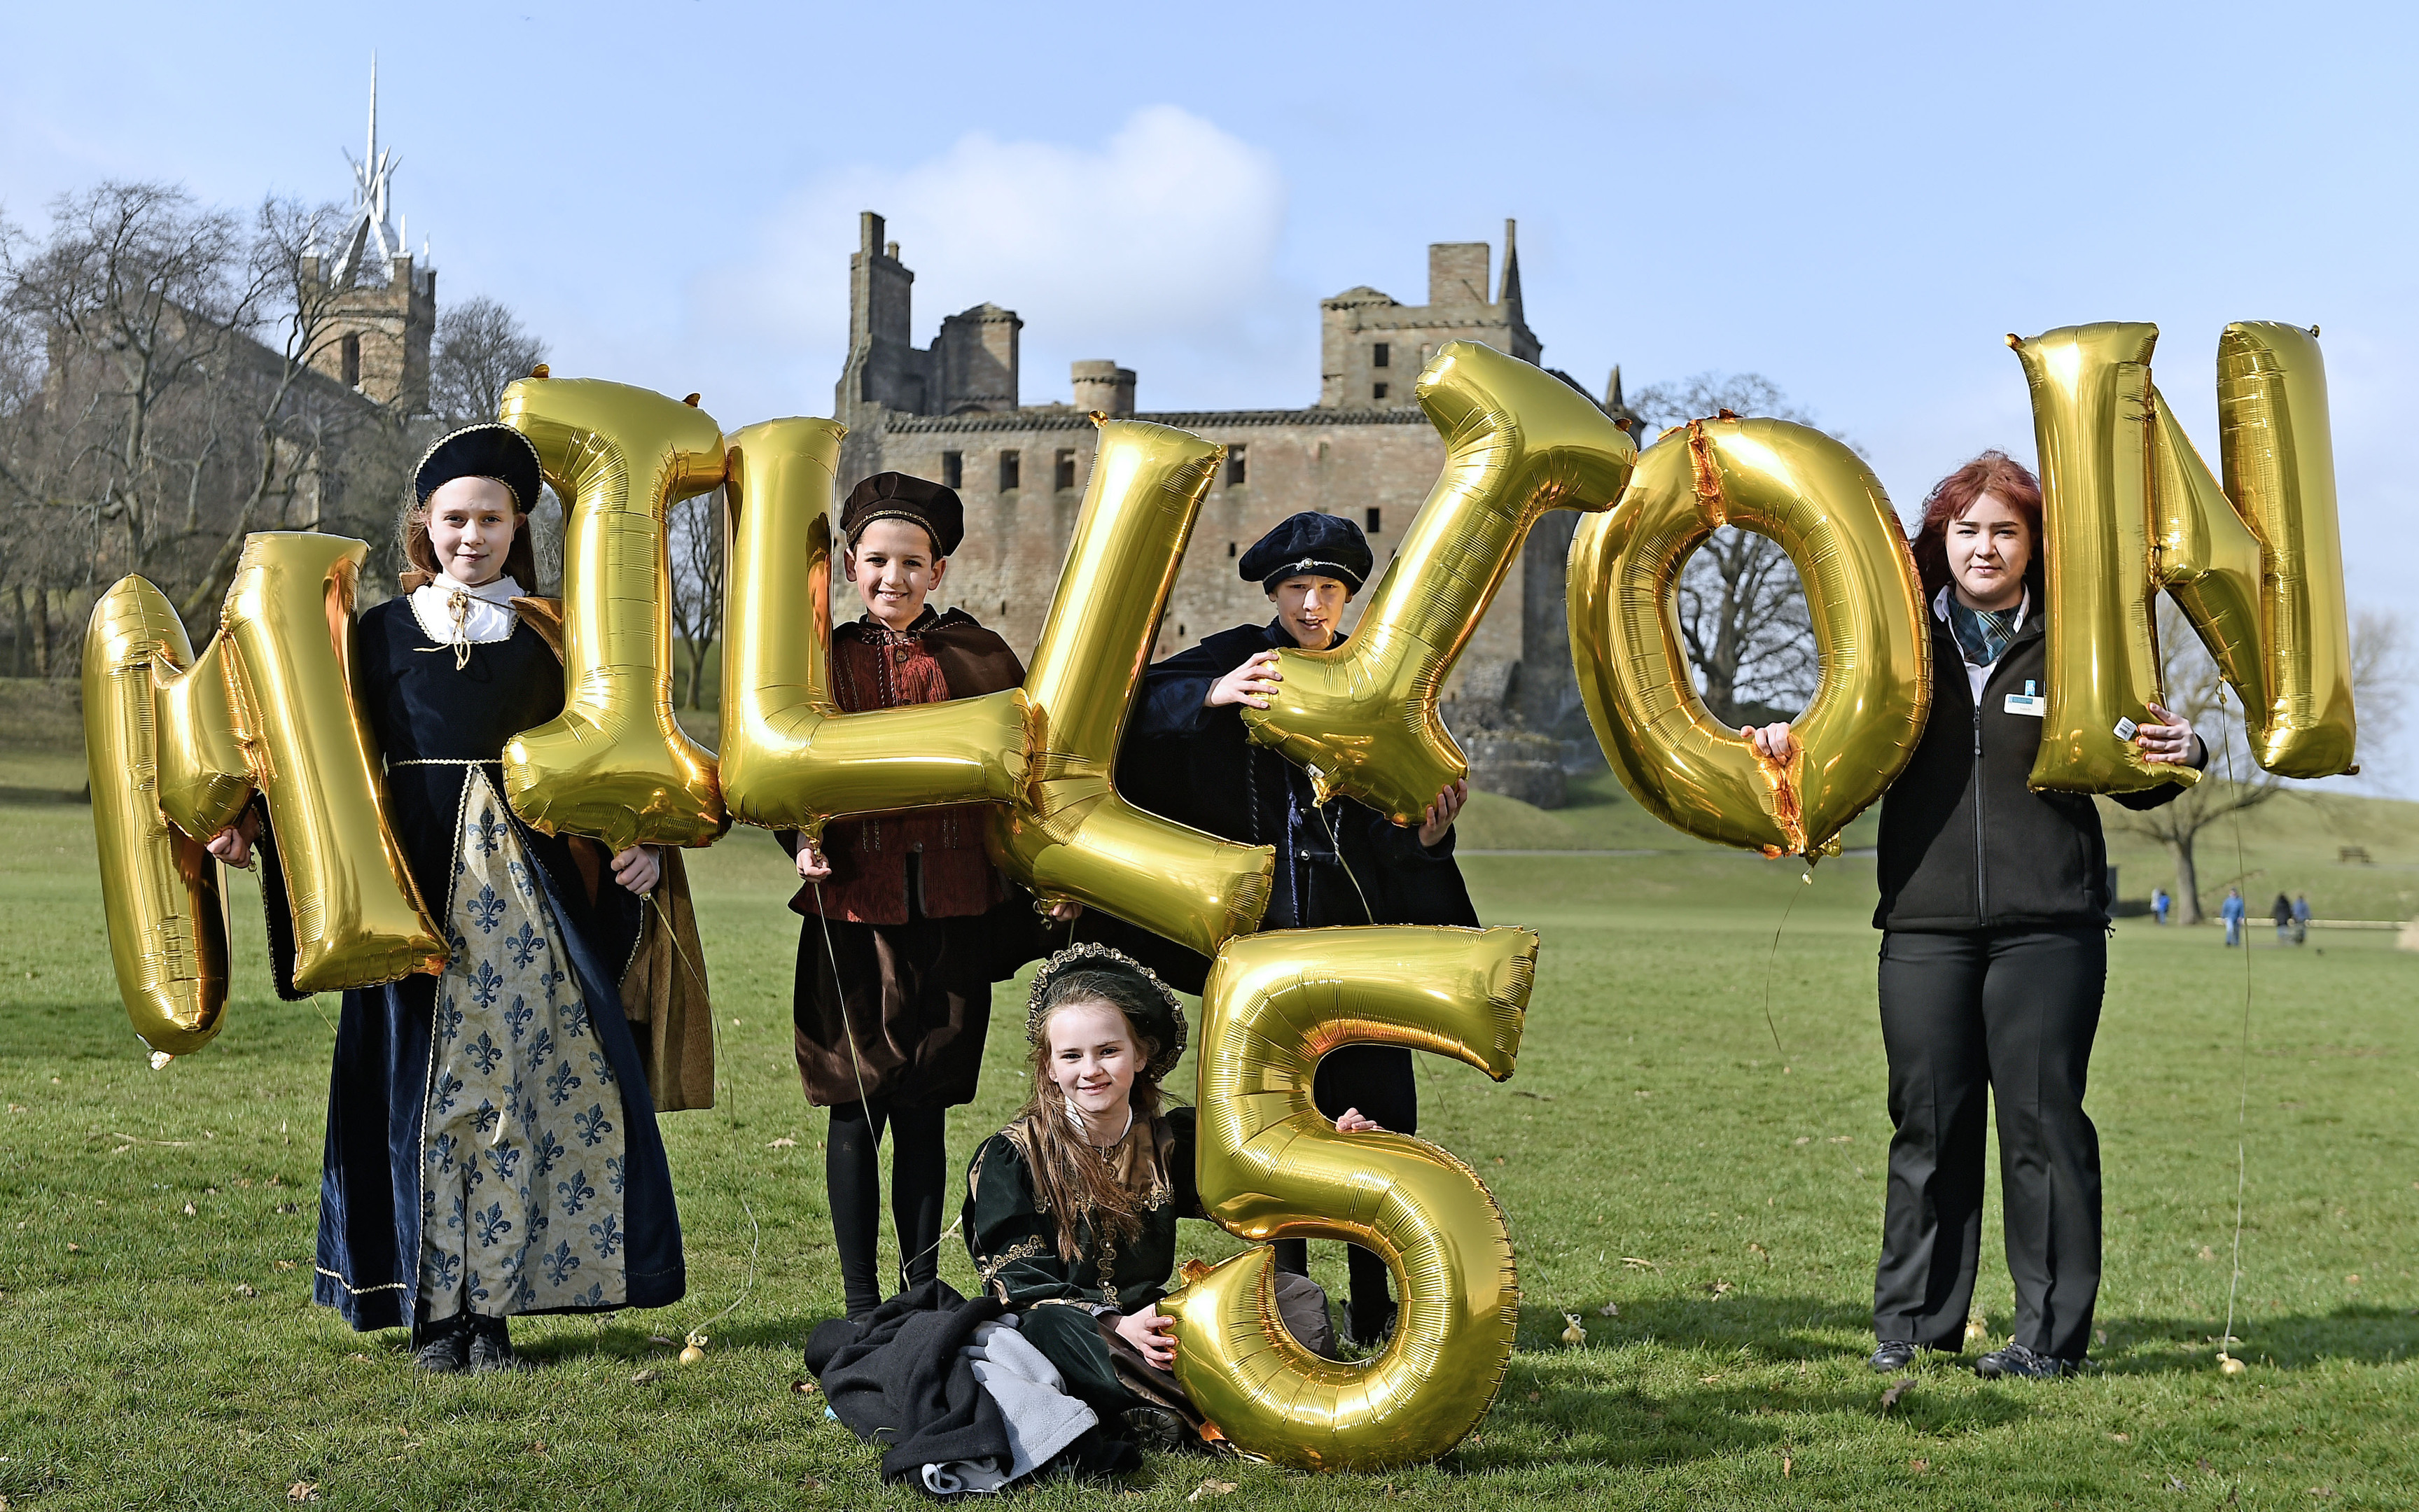 Junior Tour Guides ( L-R) Orla Mayling , Finlay Turner, Reuben Kennedy and Ellie McDonald (front) help Historic Environment Scotland (HES) celebrate a record-breaking year at Linlithgow Palace with local staff member Isabella Ogg (Neil Hanna Photography)